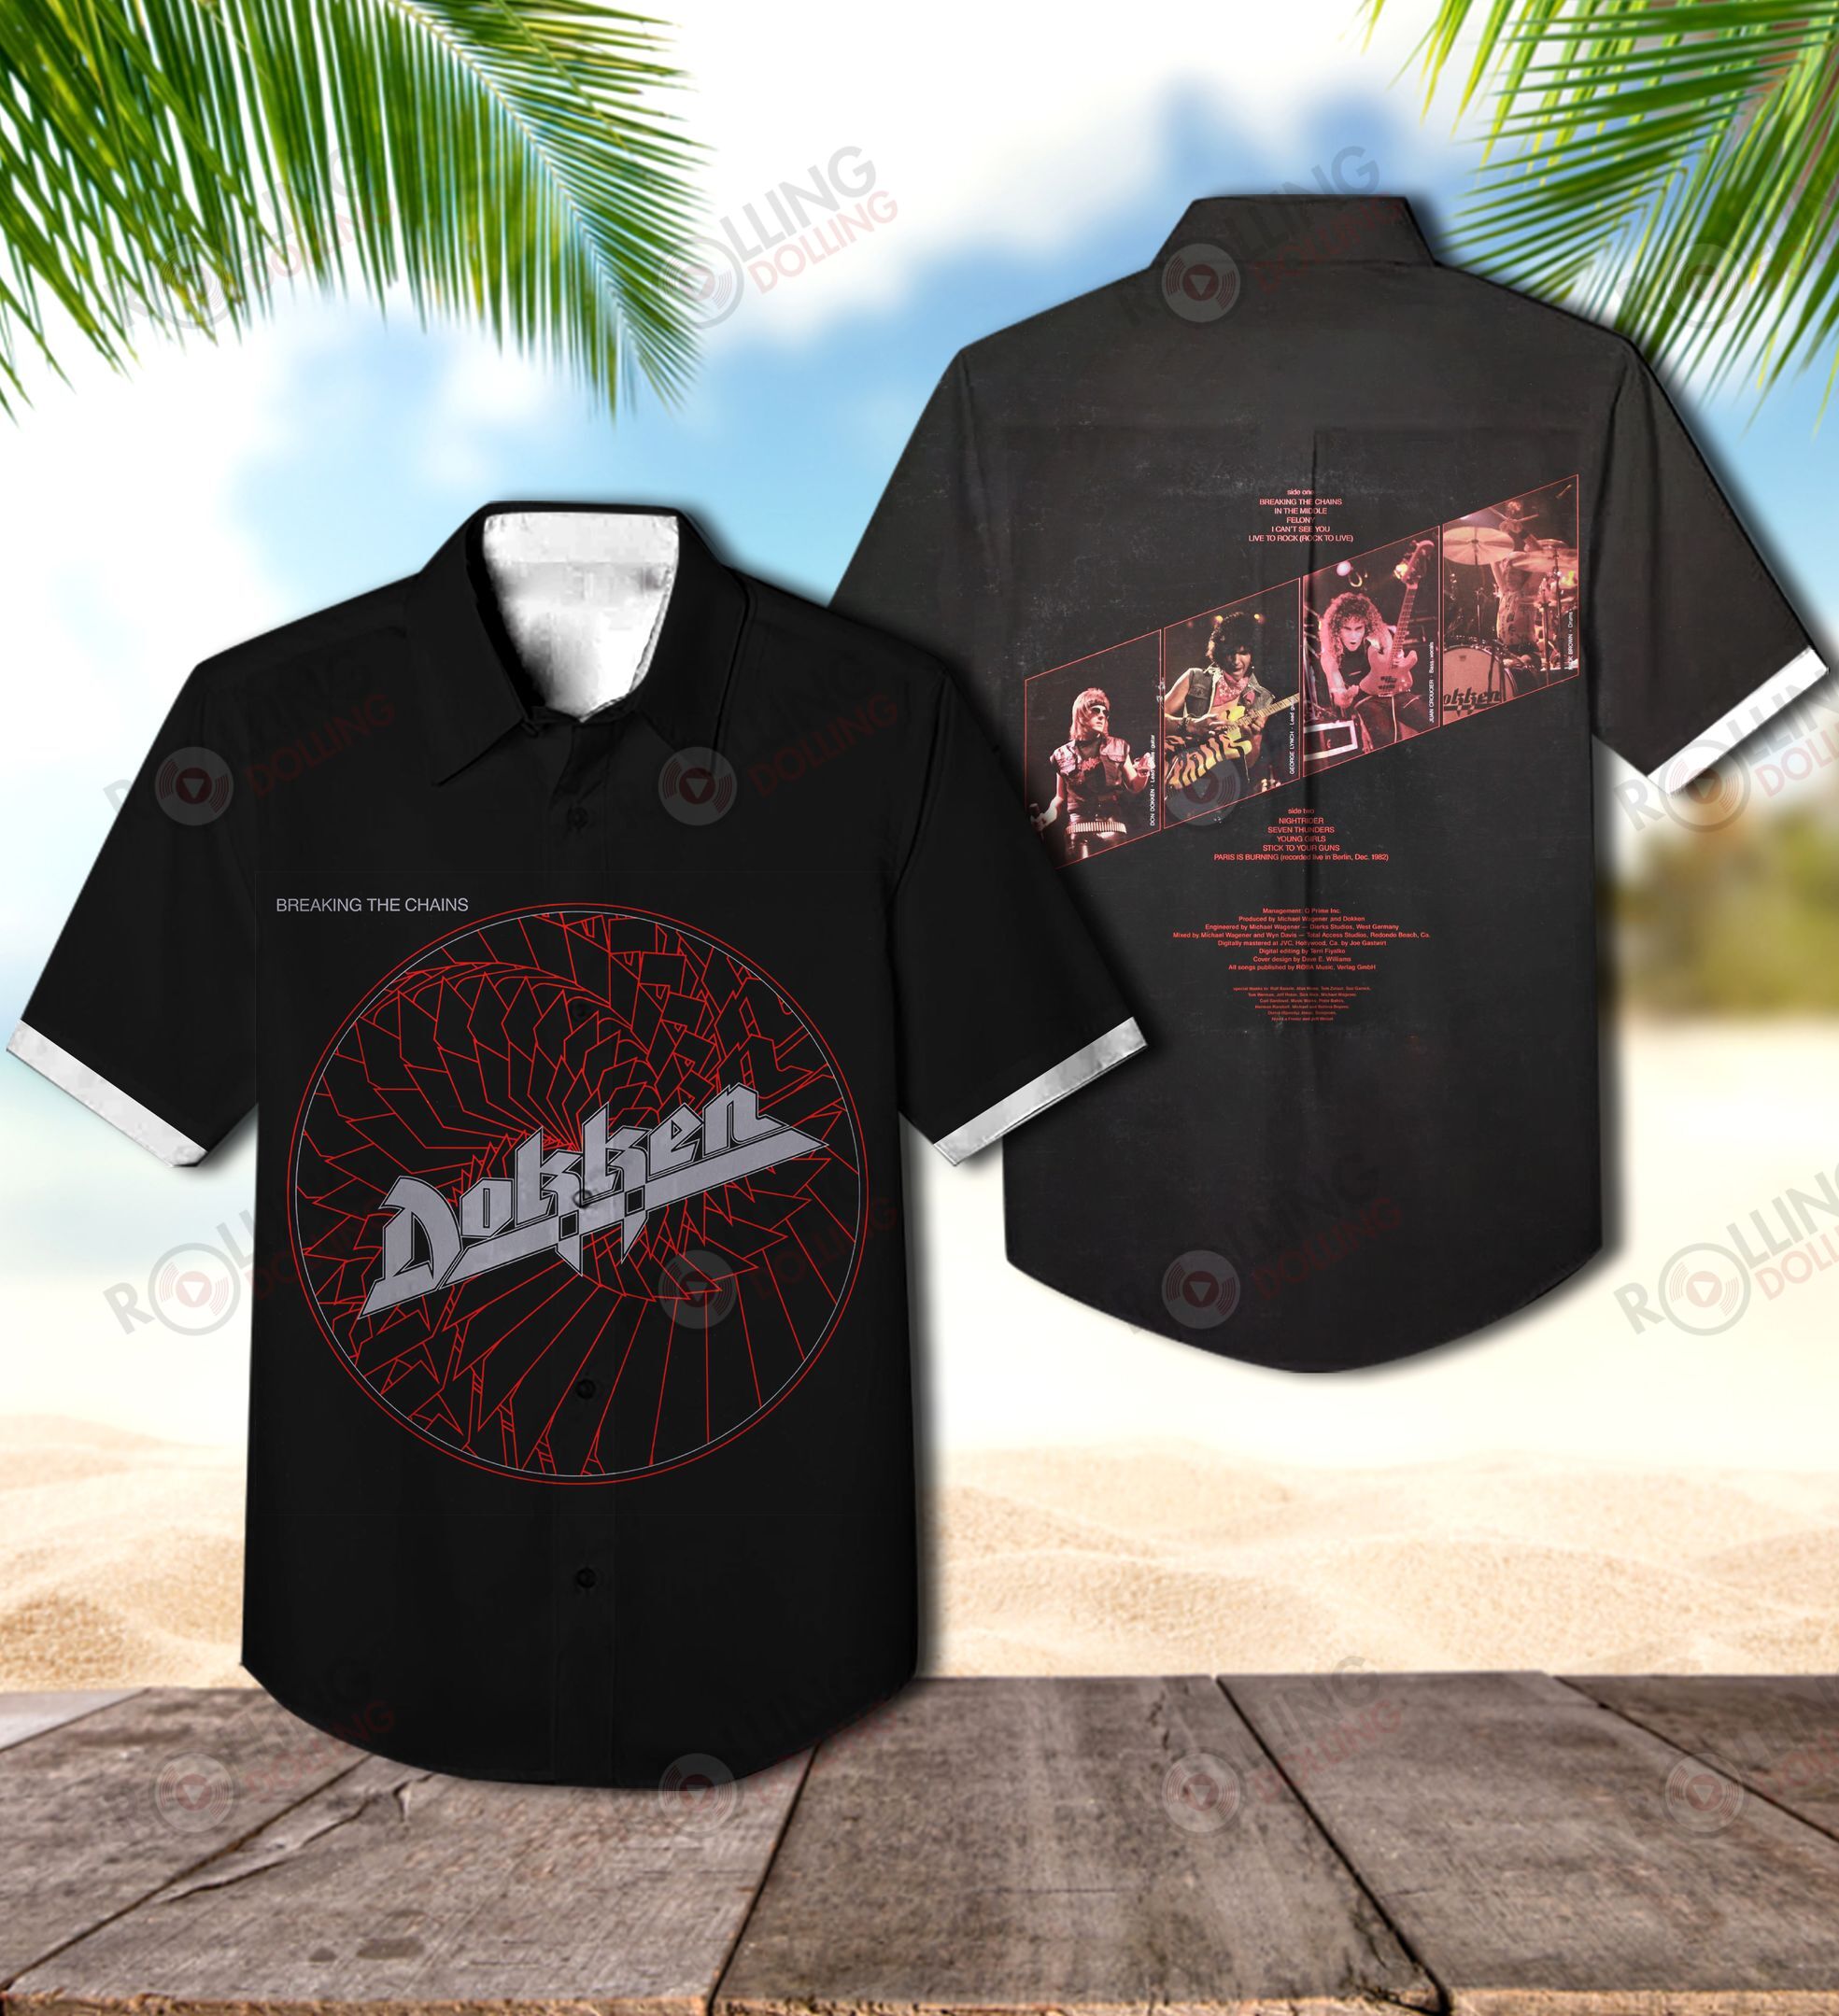 Check out these top 100+ Hawaiian shirt so cool for rock fans 175